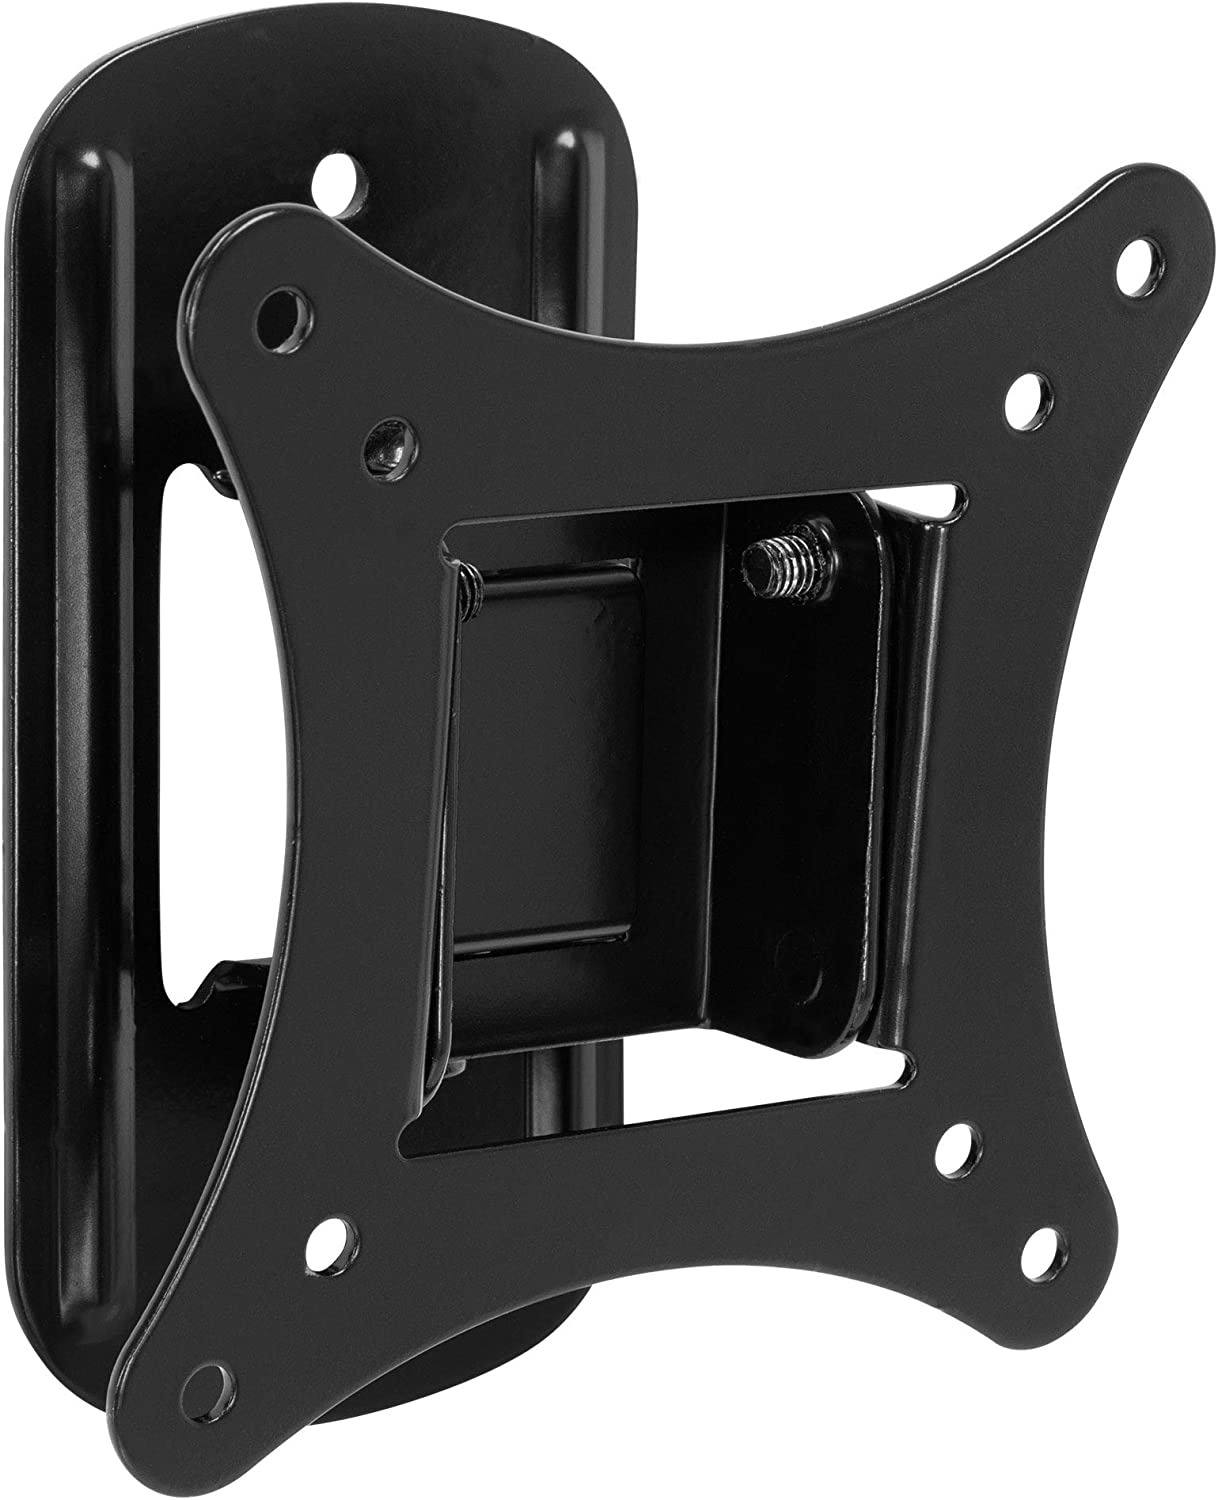 Monitor Wall Mount Quick Release Wall Mount 25 Inch Screens Compatible 